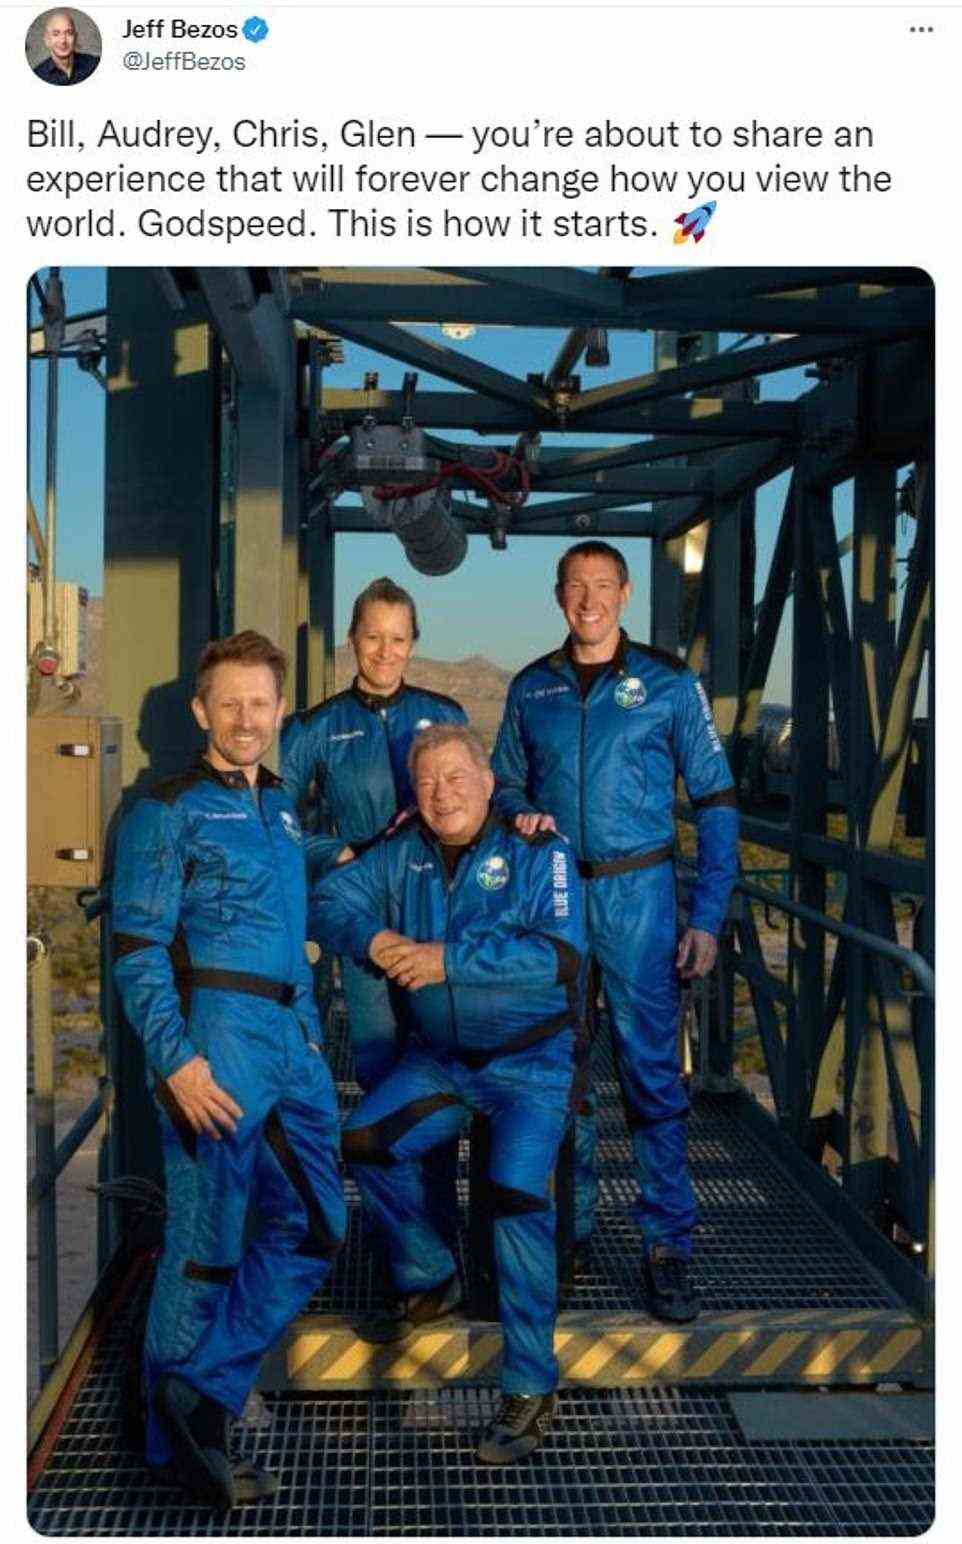 The crew, which also includes Chris Boshuizen, Glen de Vries and Audrey Powers, are launching aboard Blue Origin¿s 60-foot-tall New Shepard rocket at 10am ET from the company's Launch Site One  in Van Horn, Texas